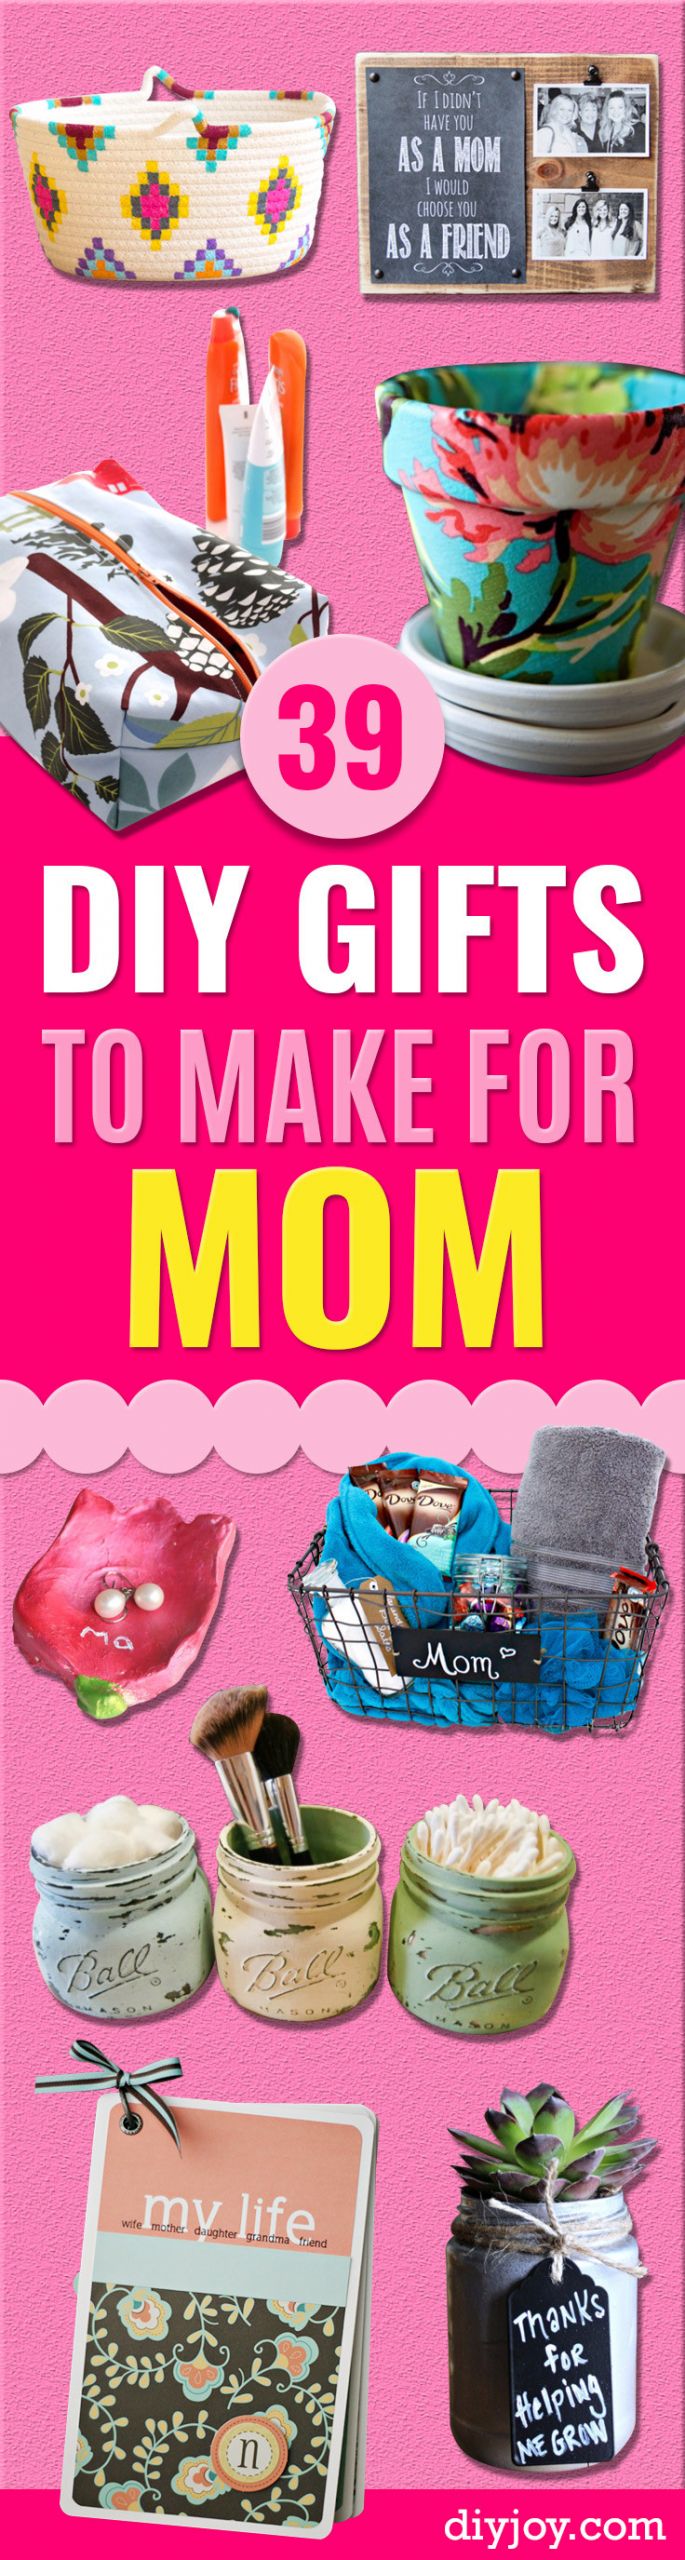 DIY Bday Gifts For Mom
 39 Creative DIY Gifts to Make for Mom